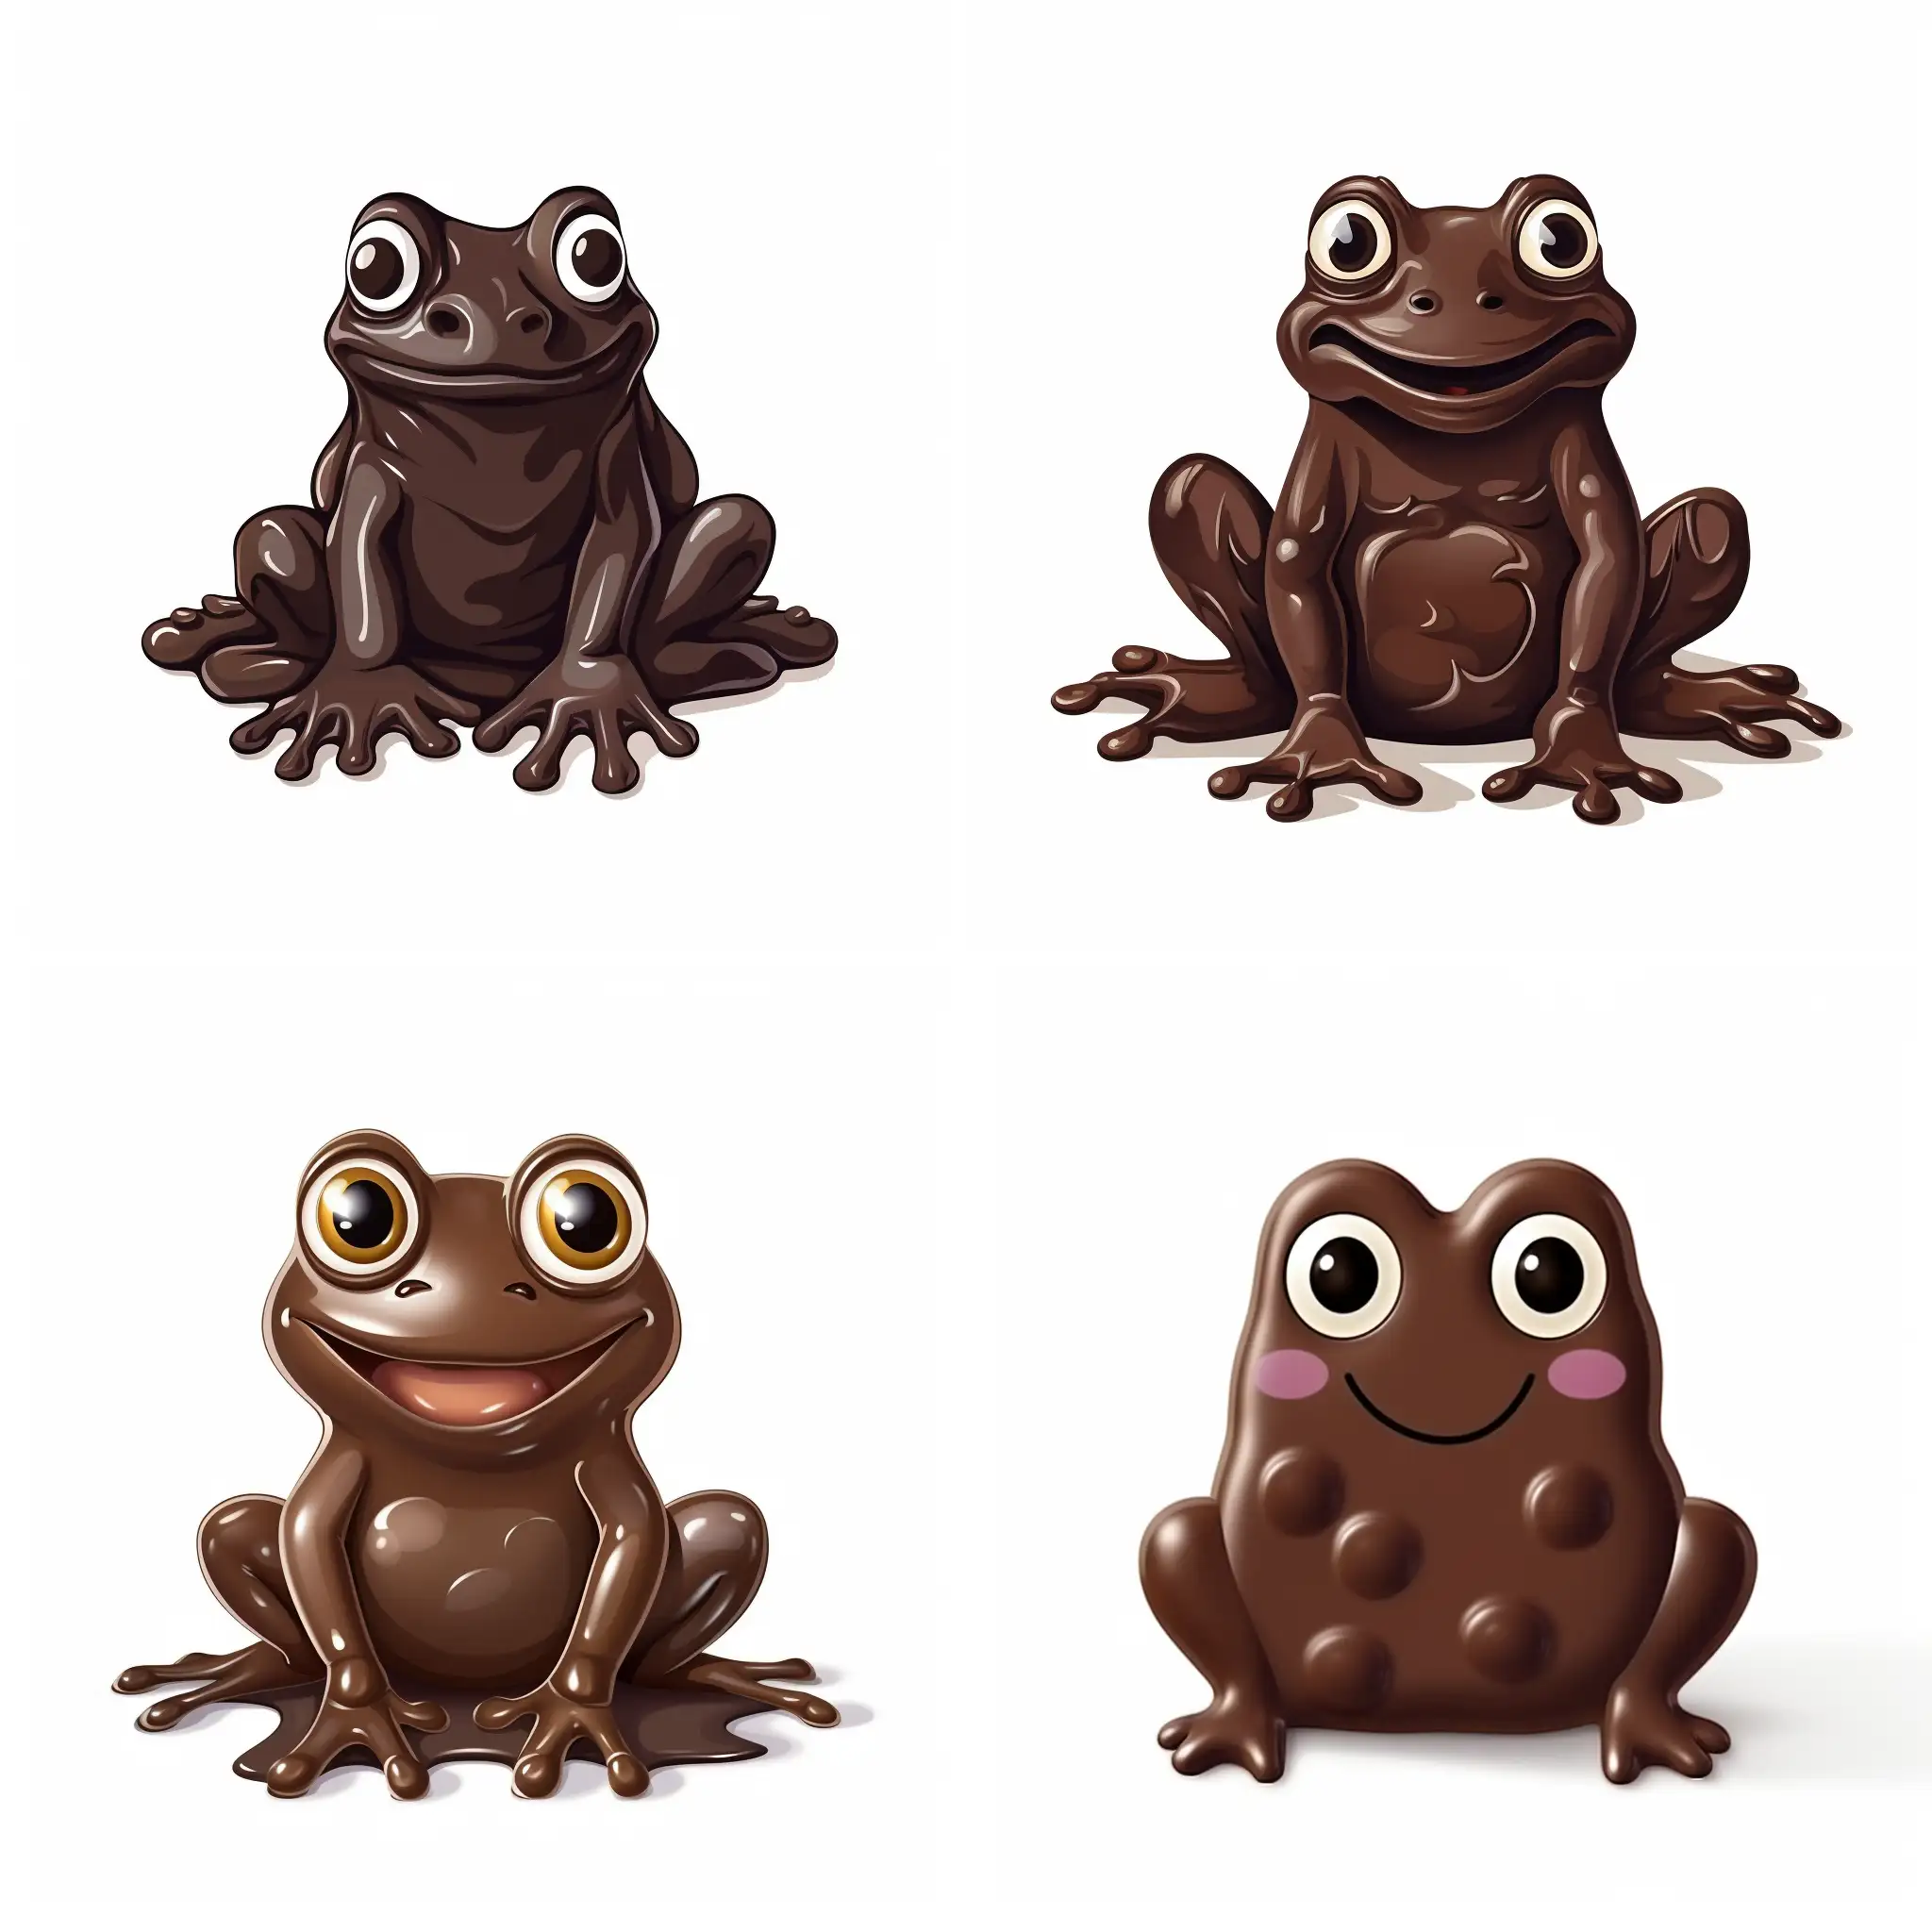 Delicious-Dark-Chocolate-Frog-Illustration-on-a-Clean-White-Background